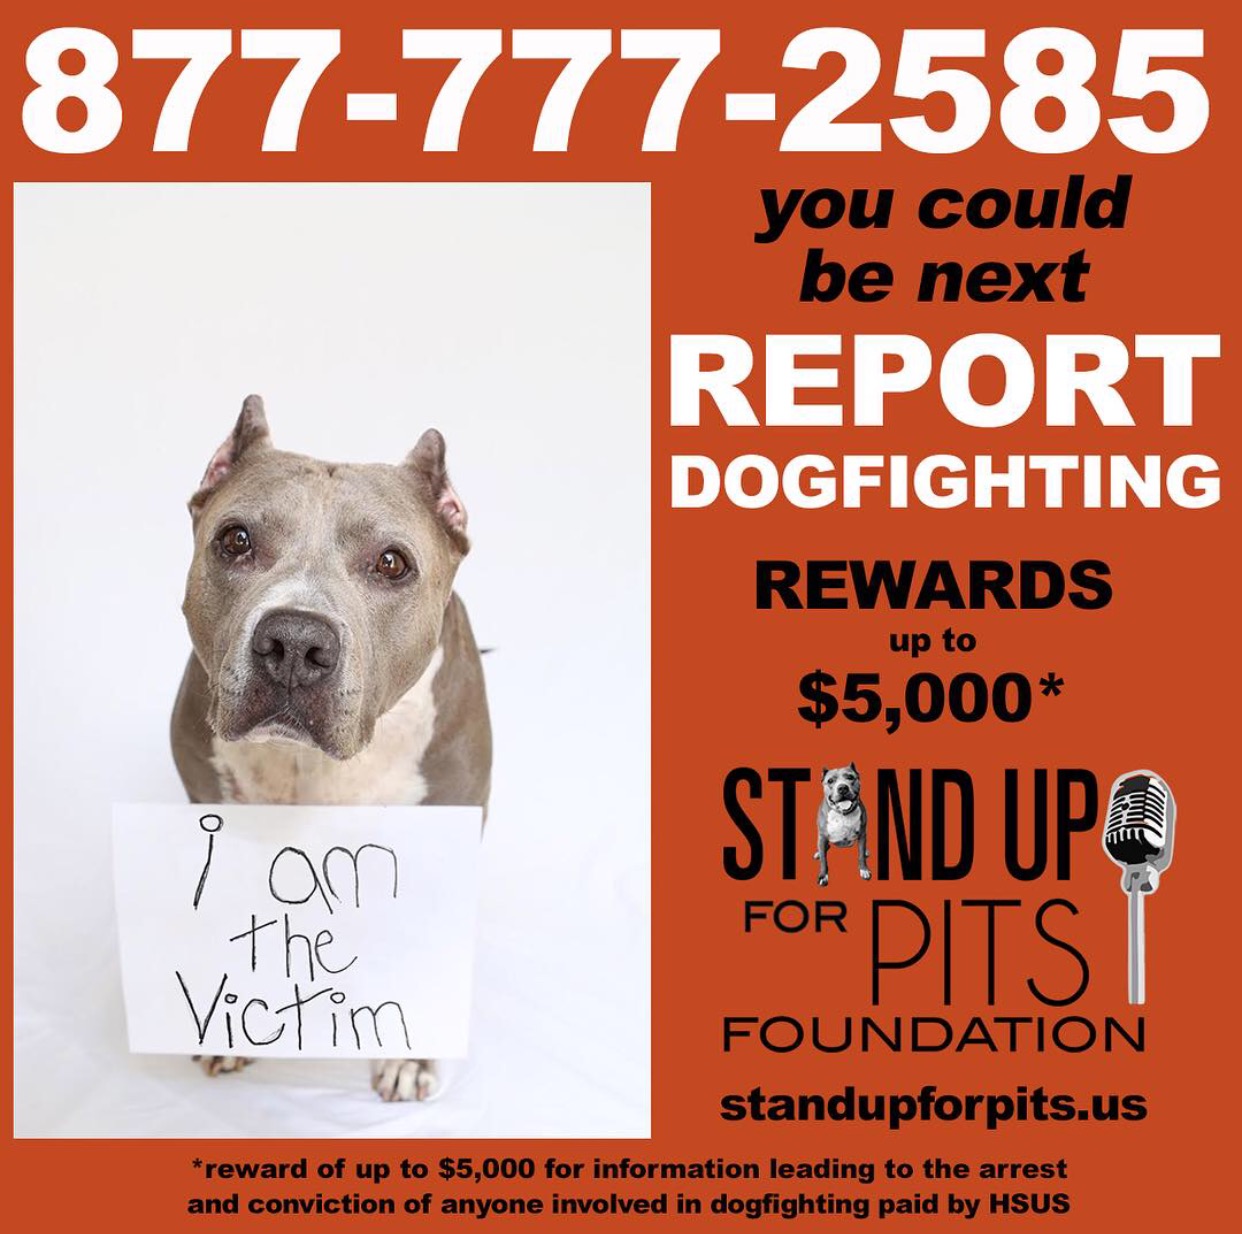 REPORT DOGFIGHTING. DO IT.